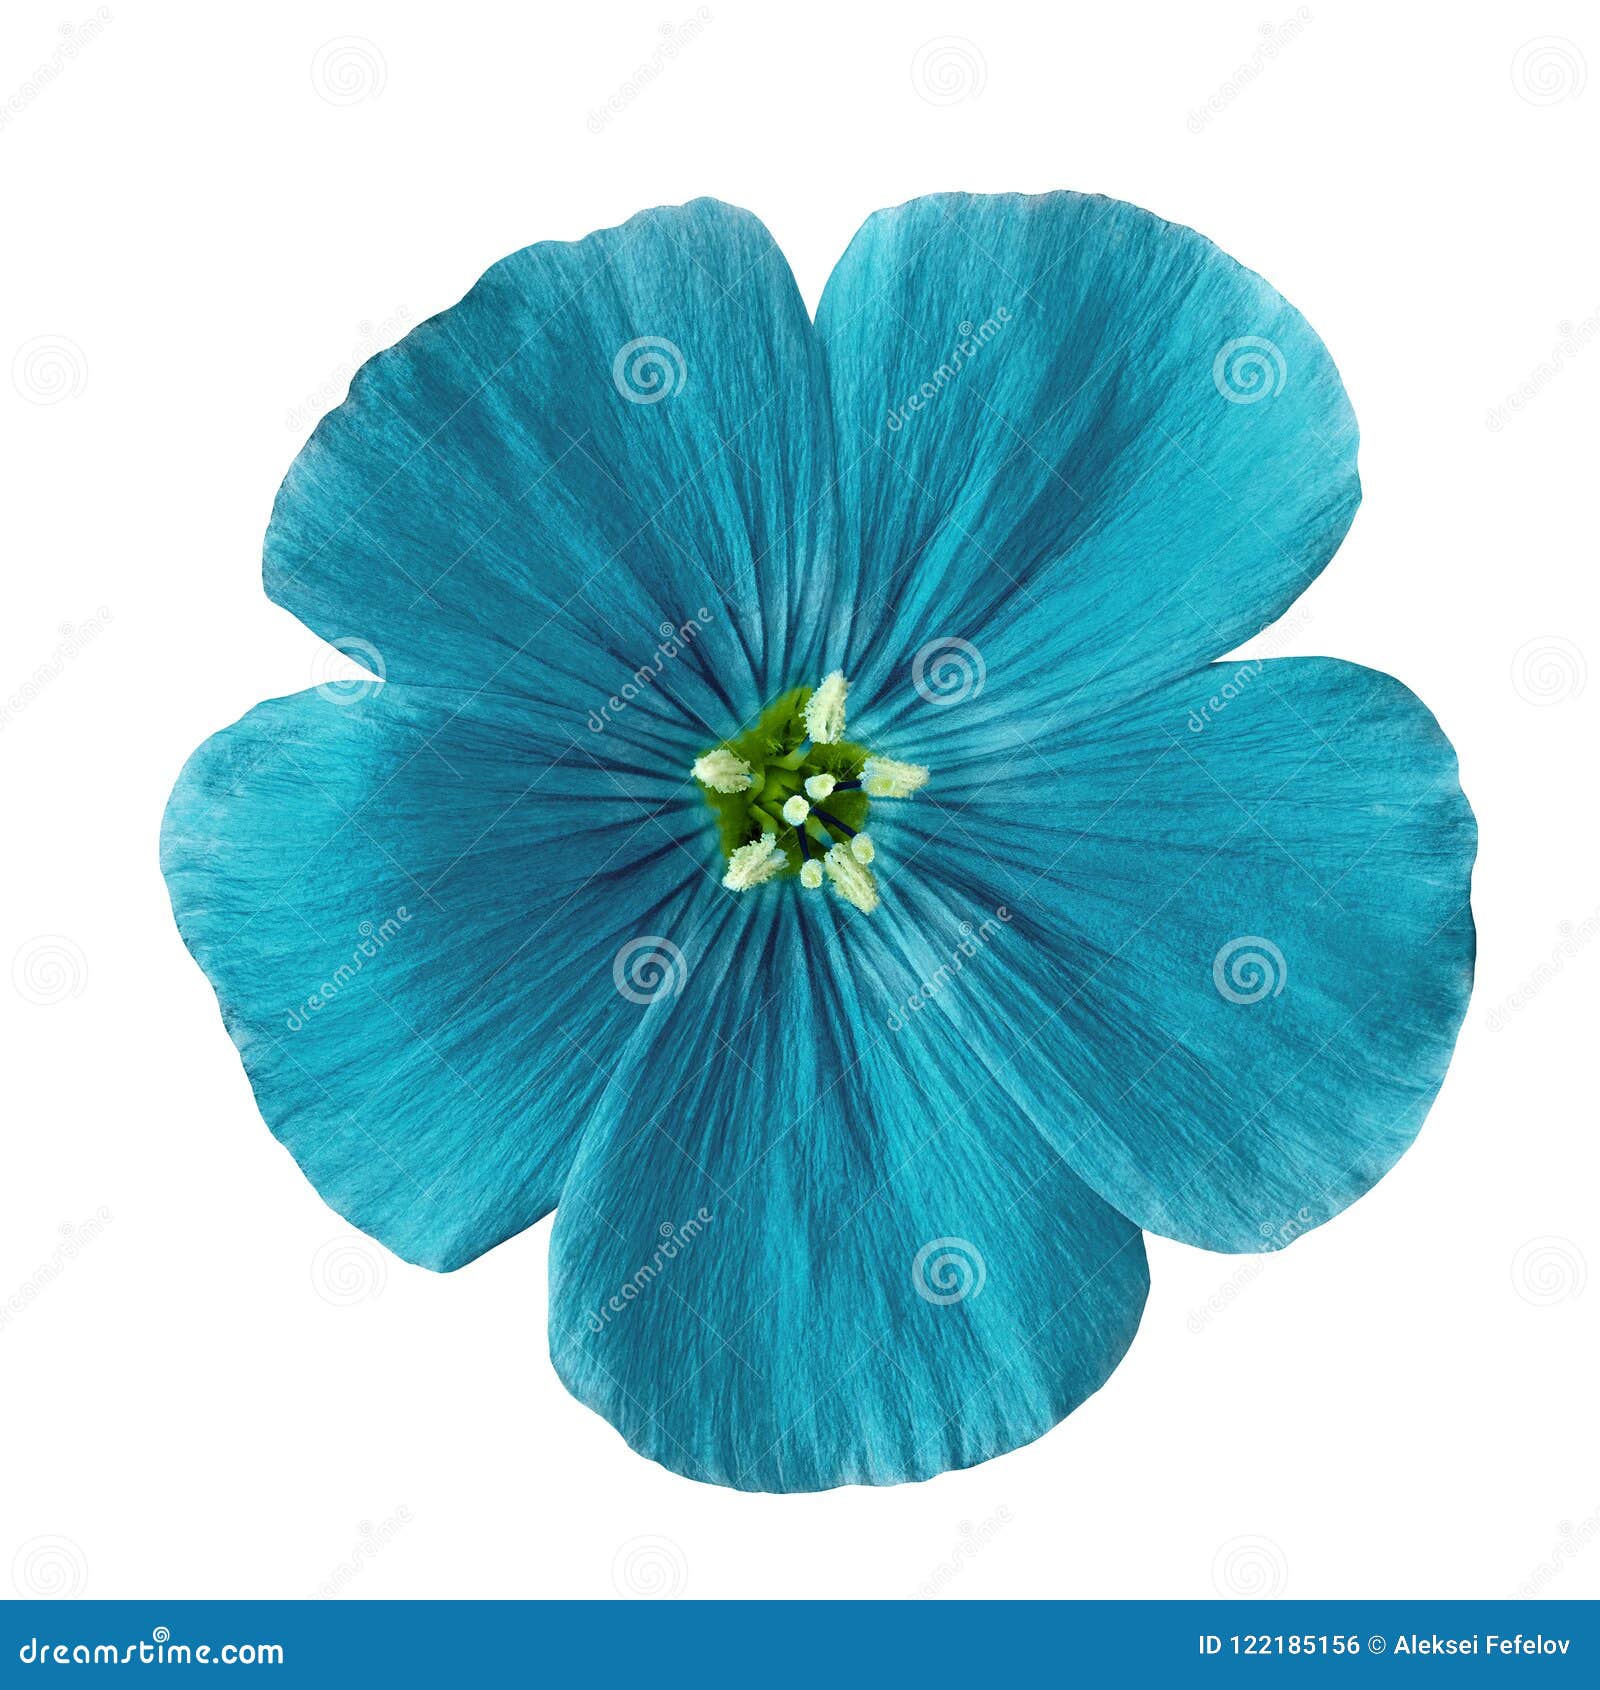 Flower Cerulean Flax Isolated on White Background. Flower Bud Close Up ...